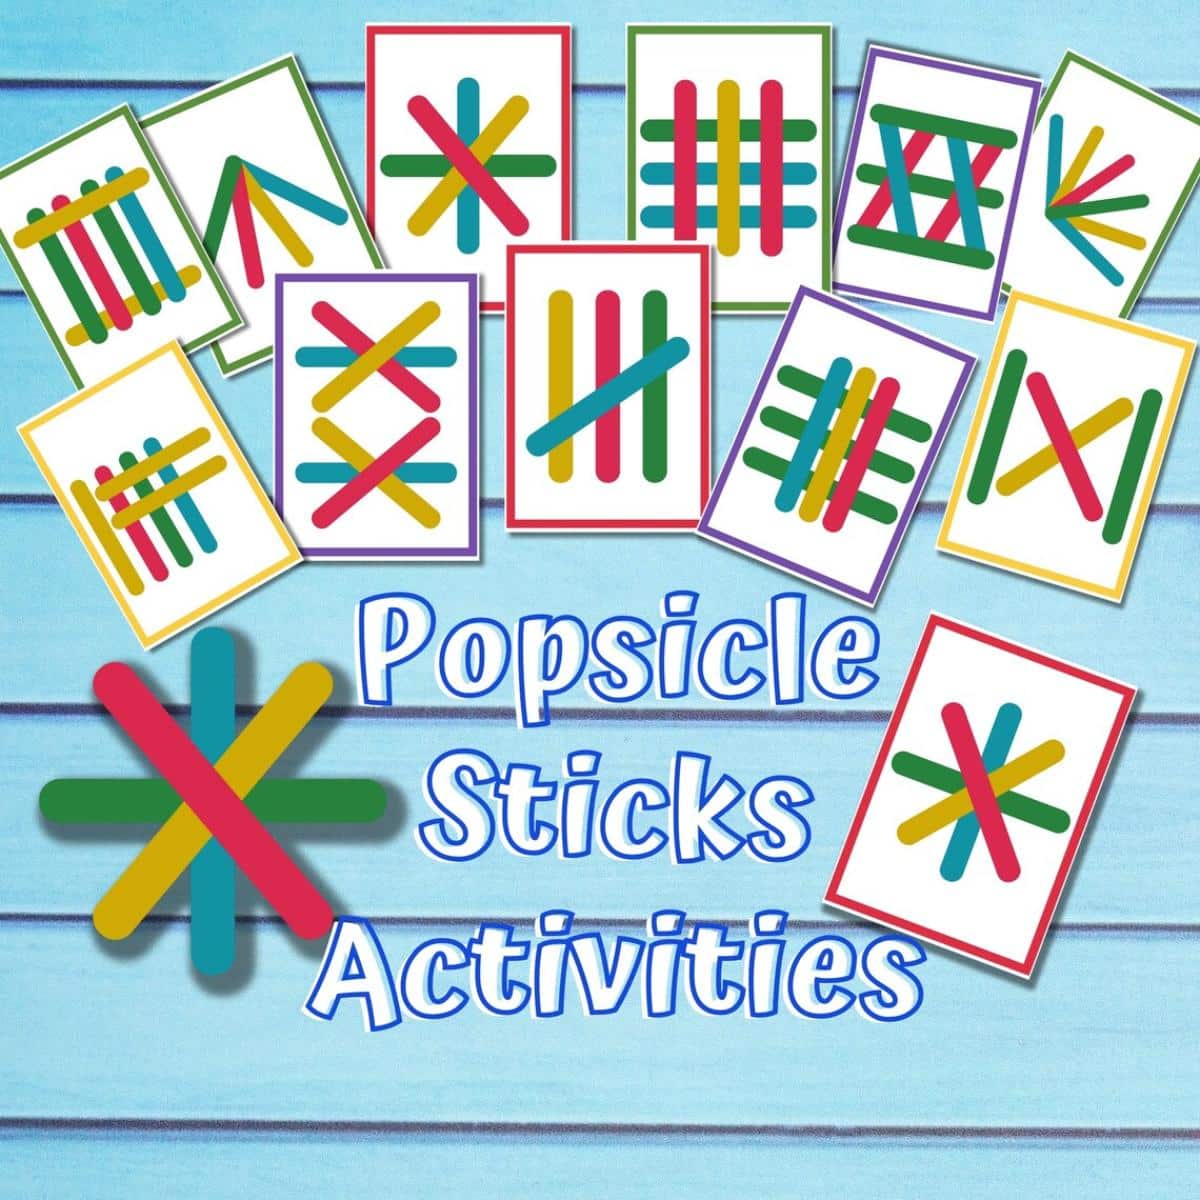 opsicle Stick Crafting Guide - 20 Engaging Activity Sheets for Kids